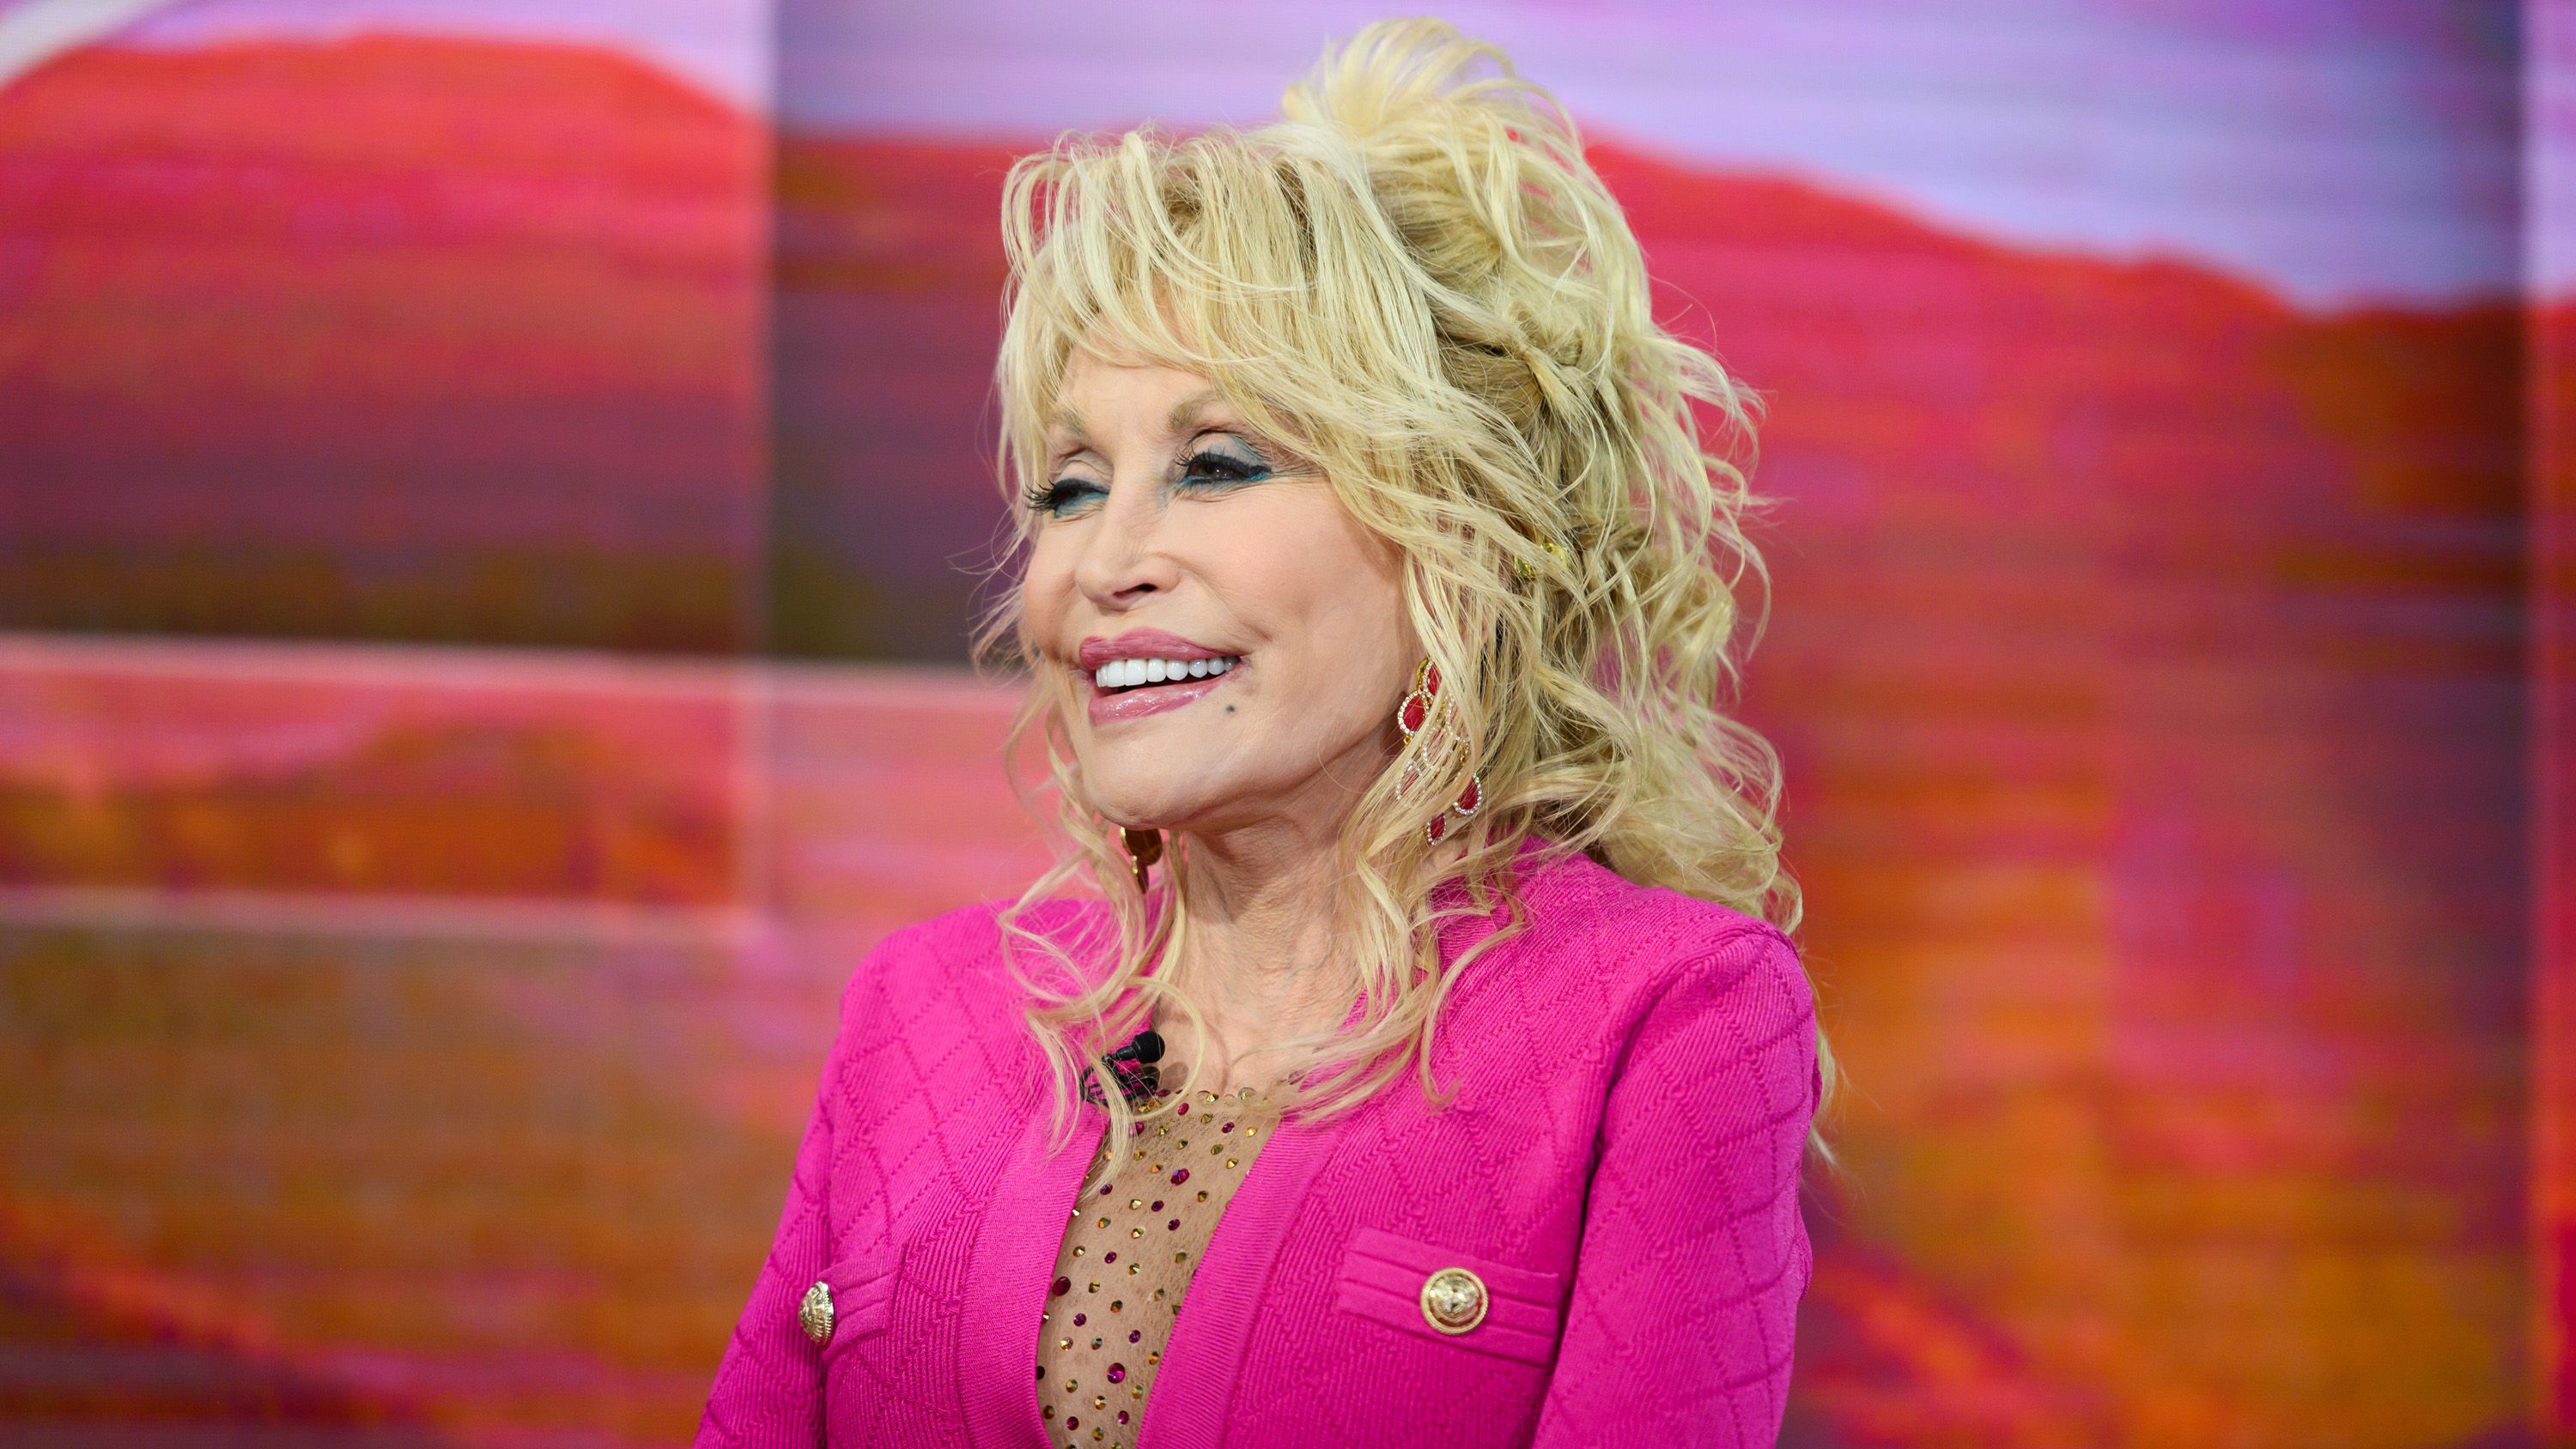 Dolly Parton says she's done with touring, wants to be 'closer to home'  with her husband as they get older